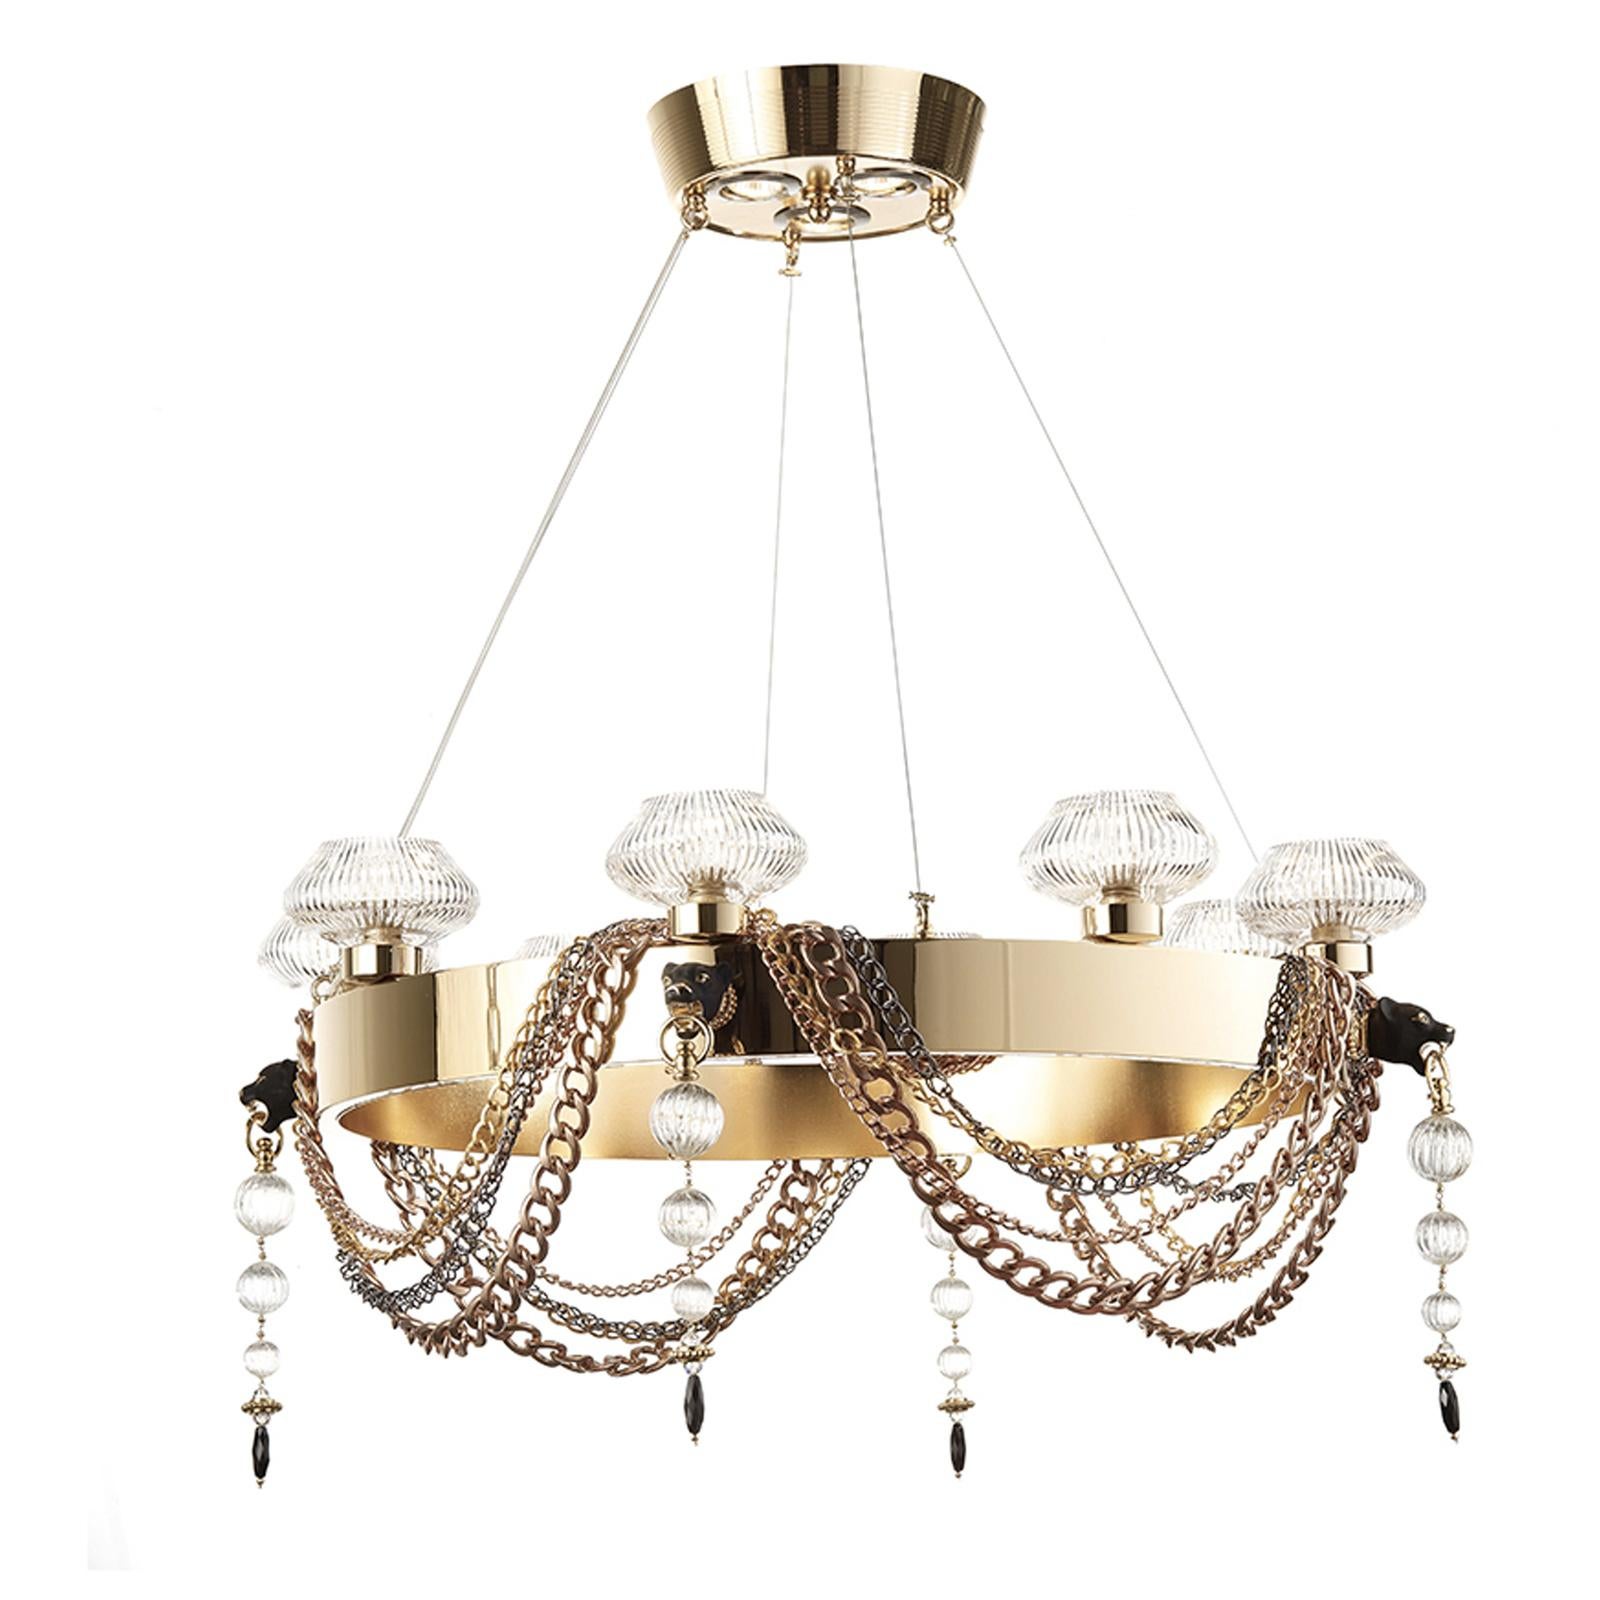 This unique chandelier will add drama and a bold decoration to an entryway or a dining room. A veritable jewel, this object of functional decor features a top hand-brushed brass base with three GU10 x 10W LED bulbs supporting a ring structure also